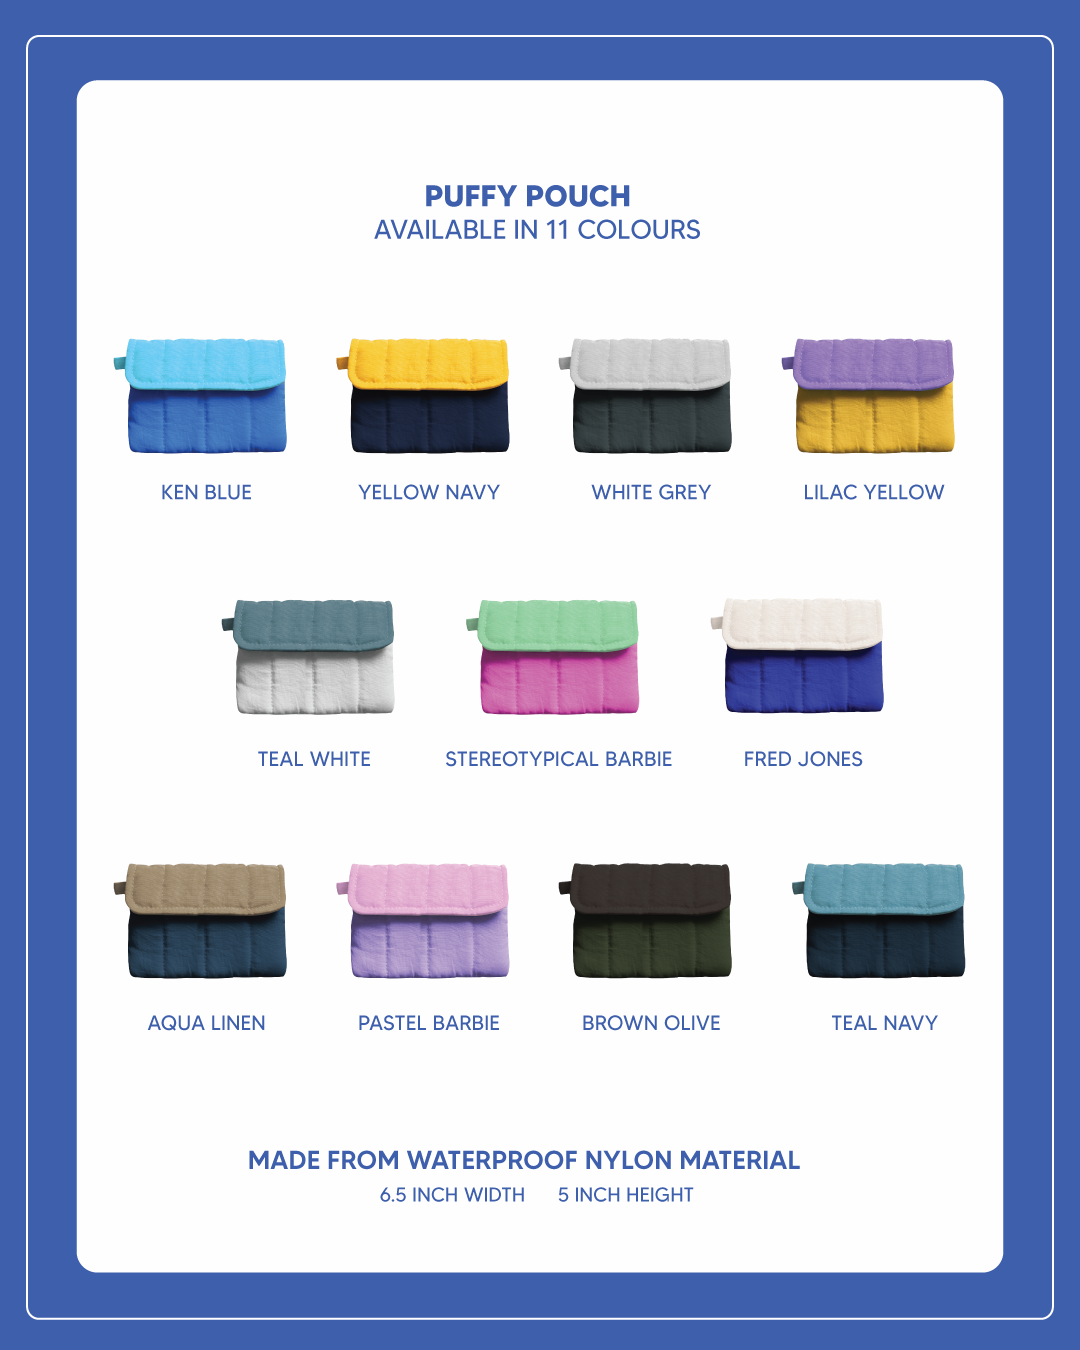 Puffy Pouch - Teal Navy